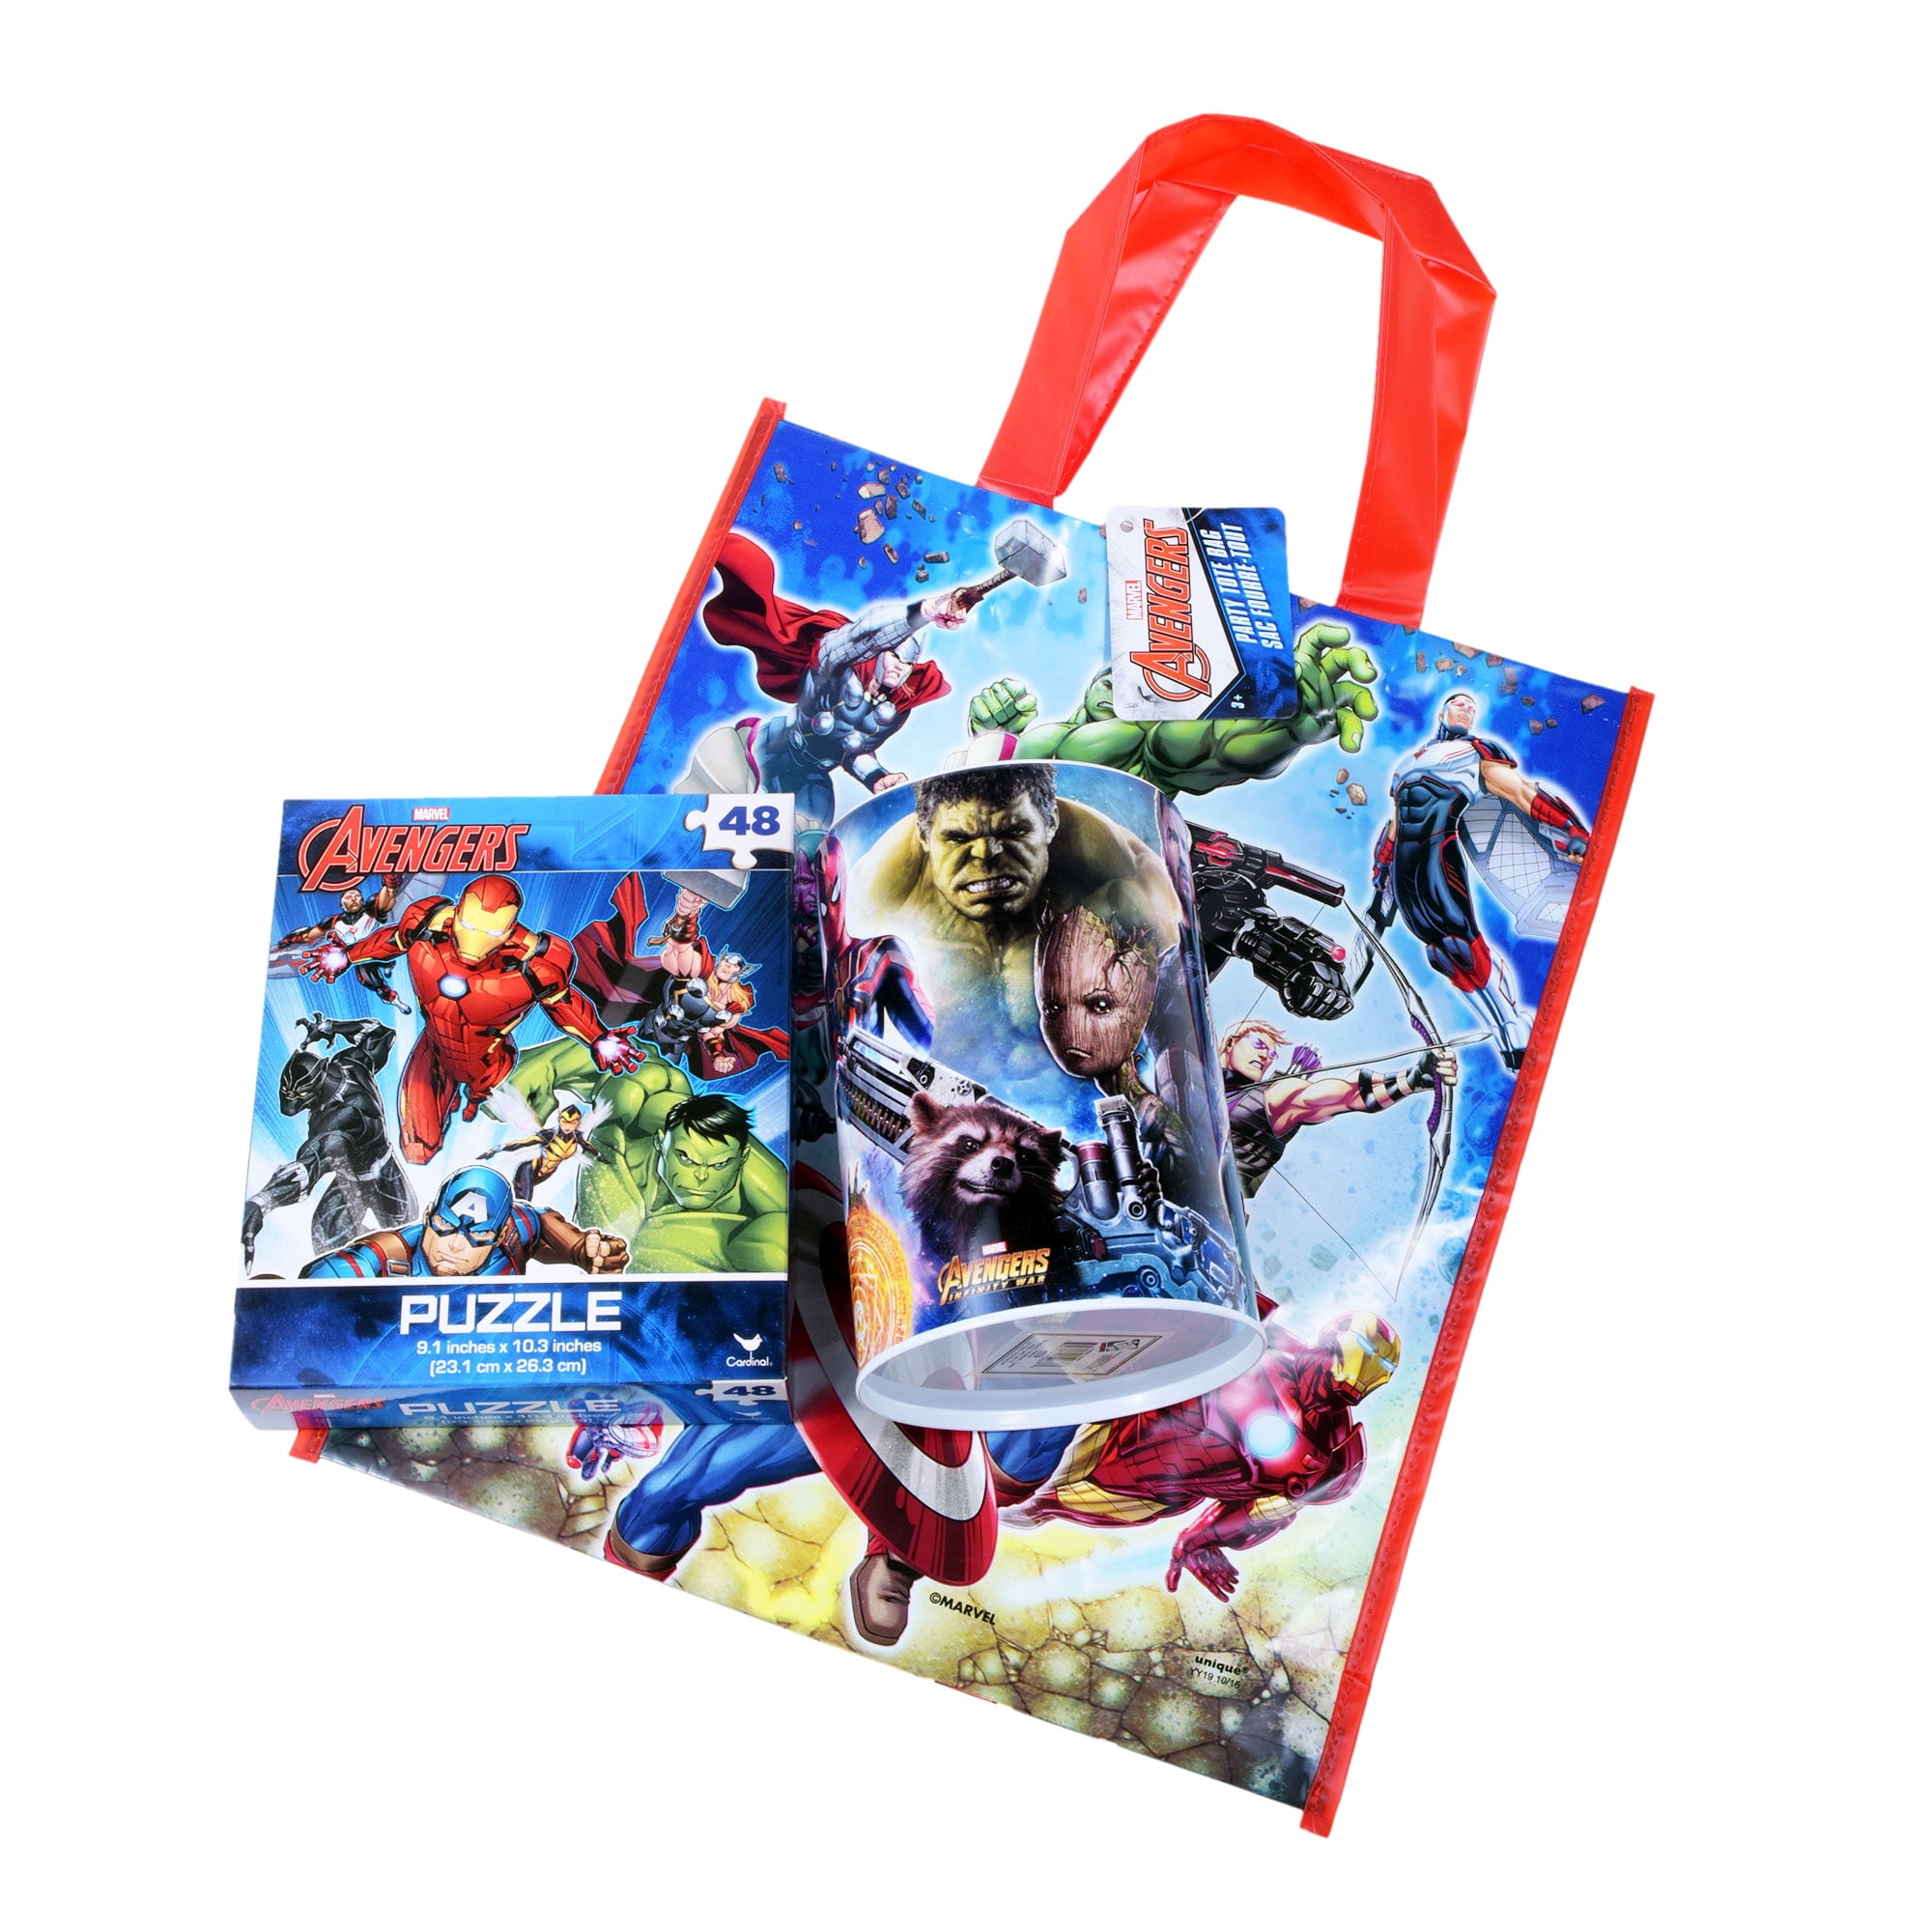 AVENGERS PADDLE BALL FAVOR BIRTHDAY PARTY supplies FREE SHIPPING 